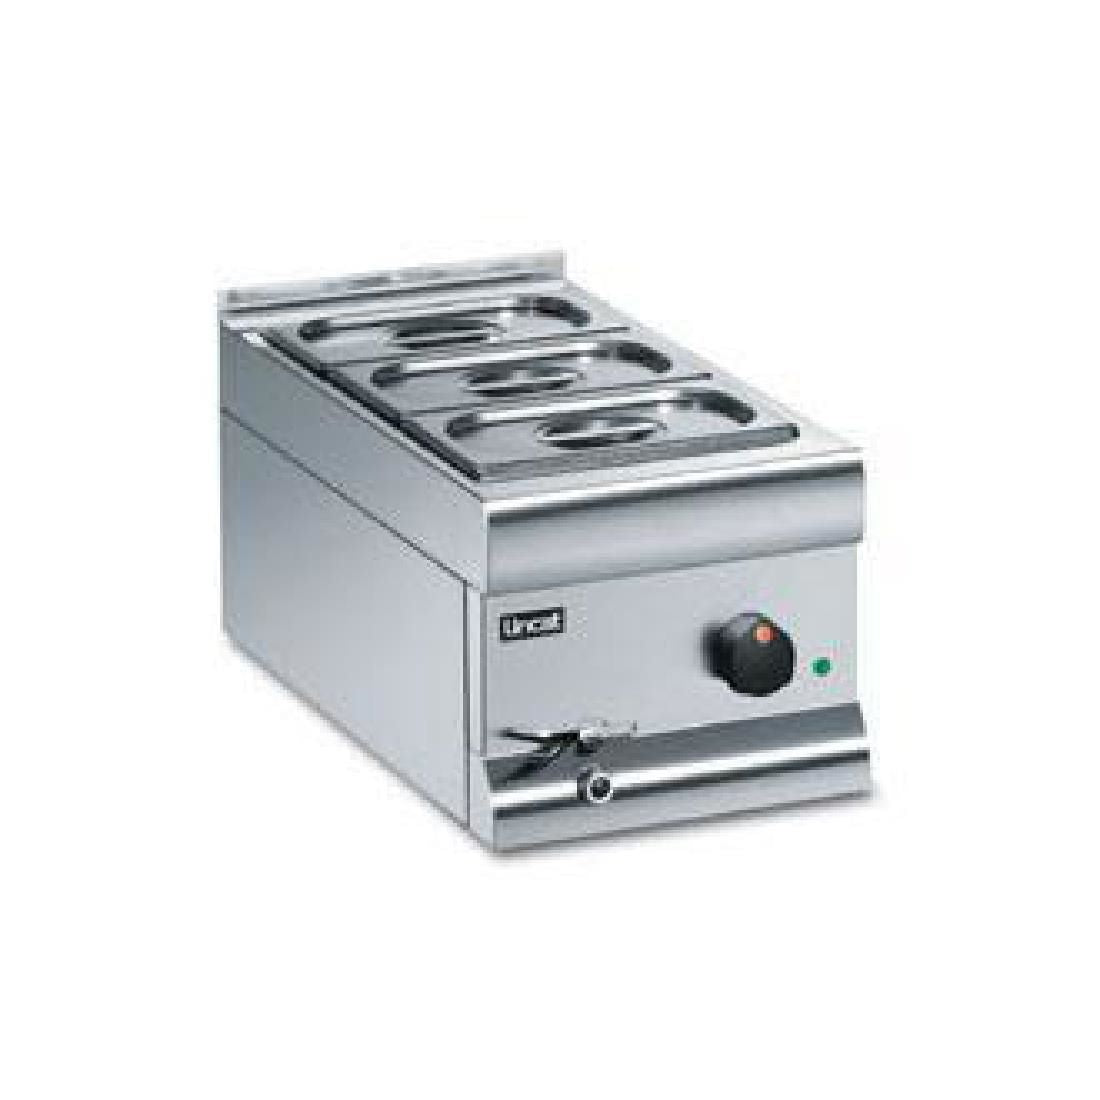 BM3W - Lincat Silverlink 600 Electric Counter-top Bain Marie - Wet Heat - Gastronorms - Base only - W 300 mm - 1.0 kW JD Catering Equipment Solutions Ltd